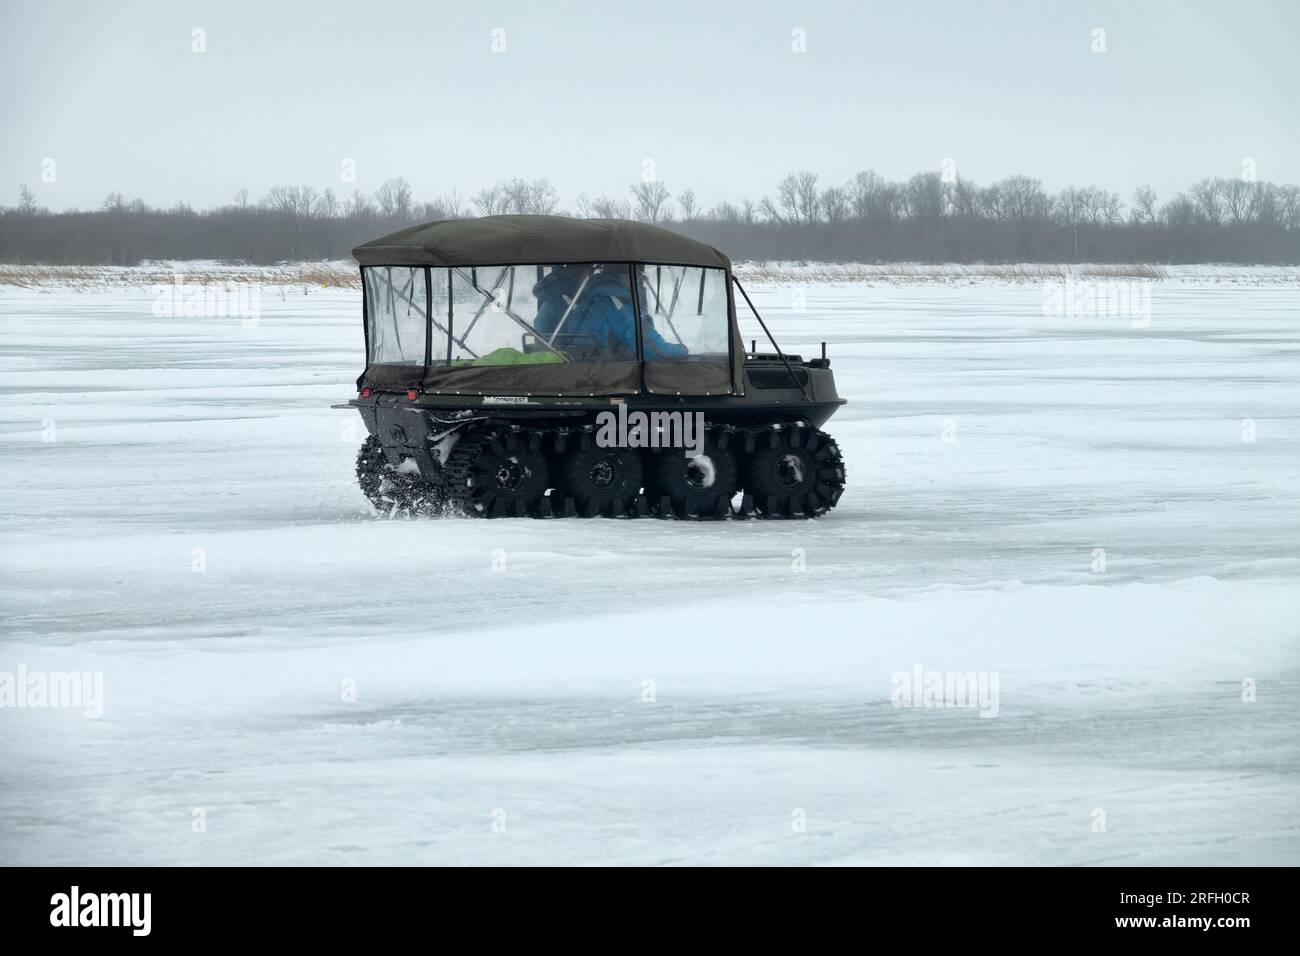 Russia, Svir river mouth- February 24, 2019: Snowmobiles on the ice of the North Sea. Use of oversnow vehicle by travelers and fishermen. Snowcar Stock Photo